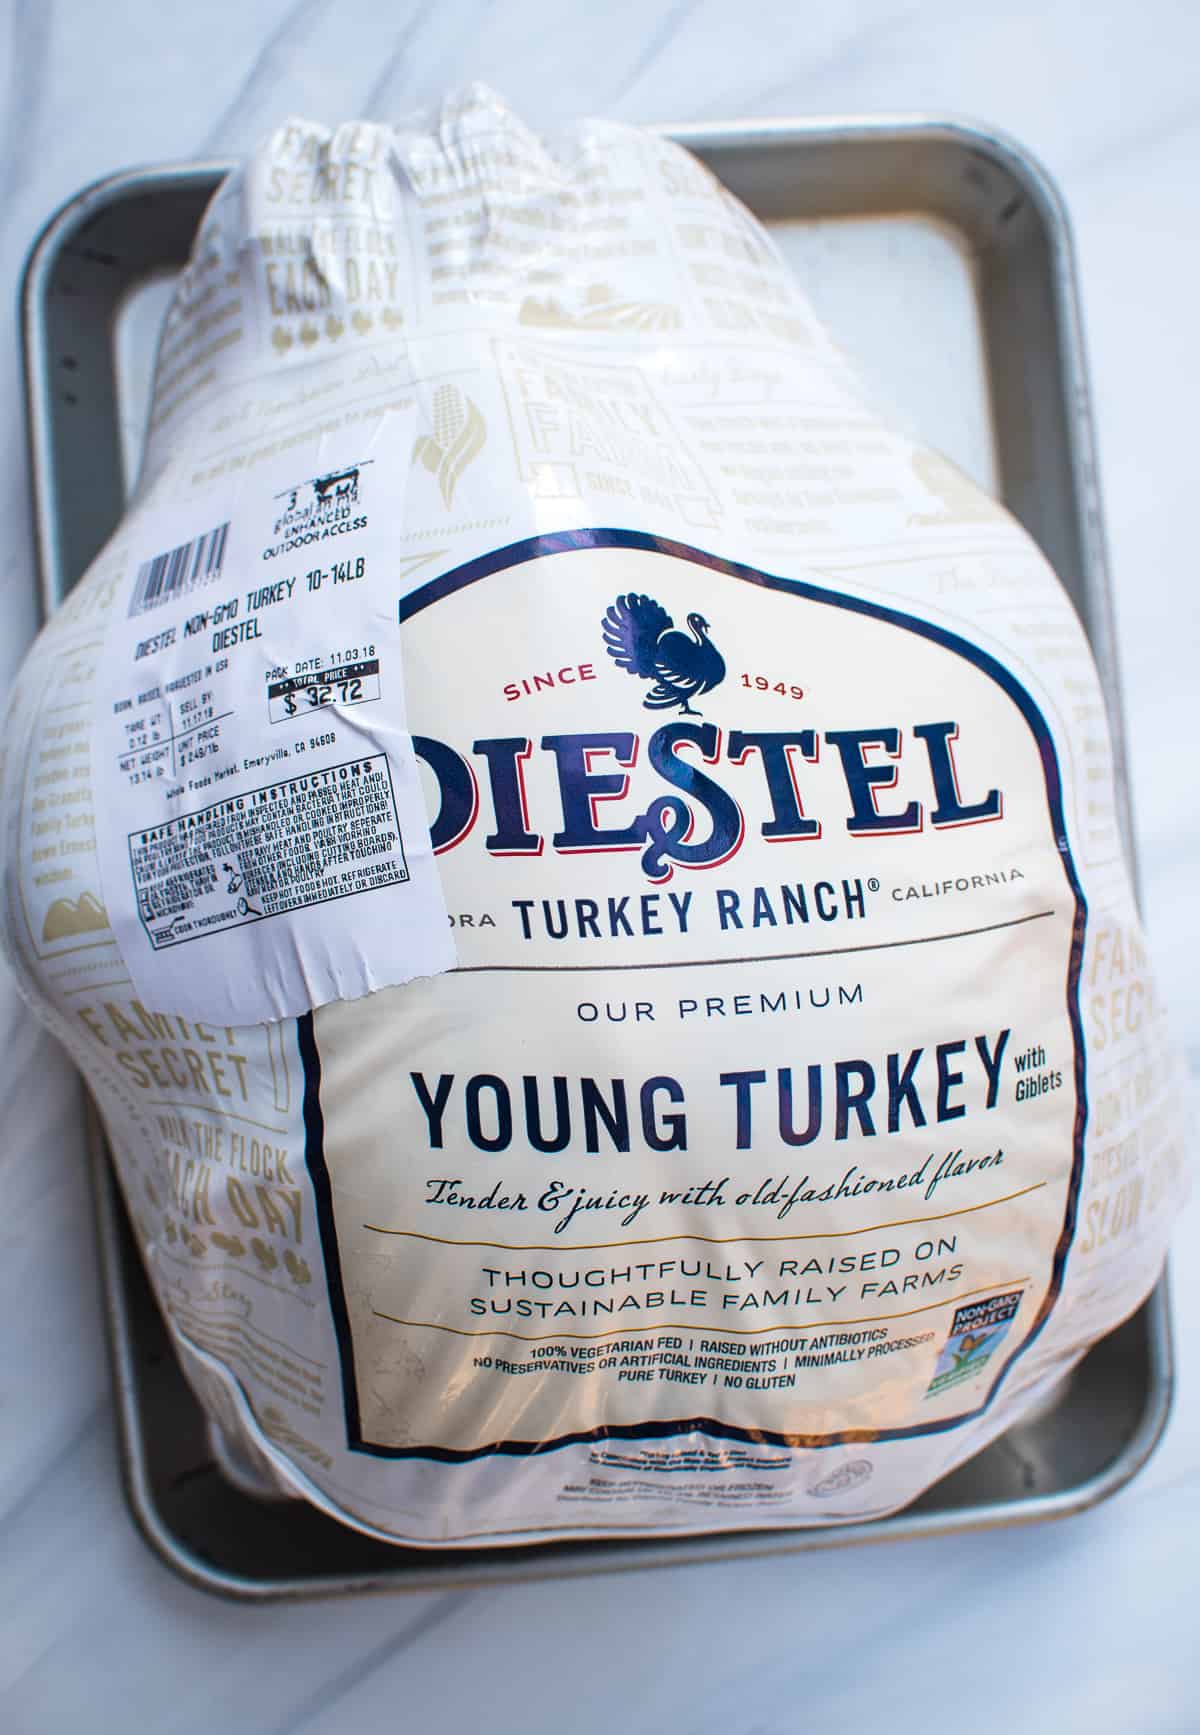 A Diestel Young Turkey from Whole Foods.